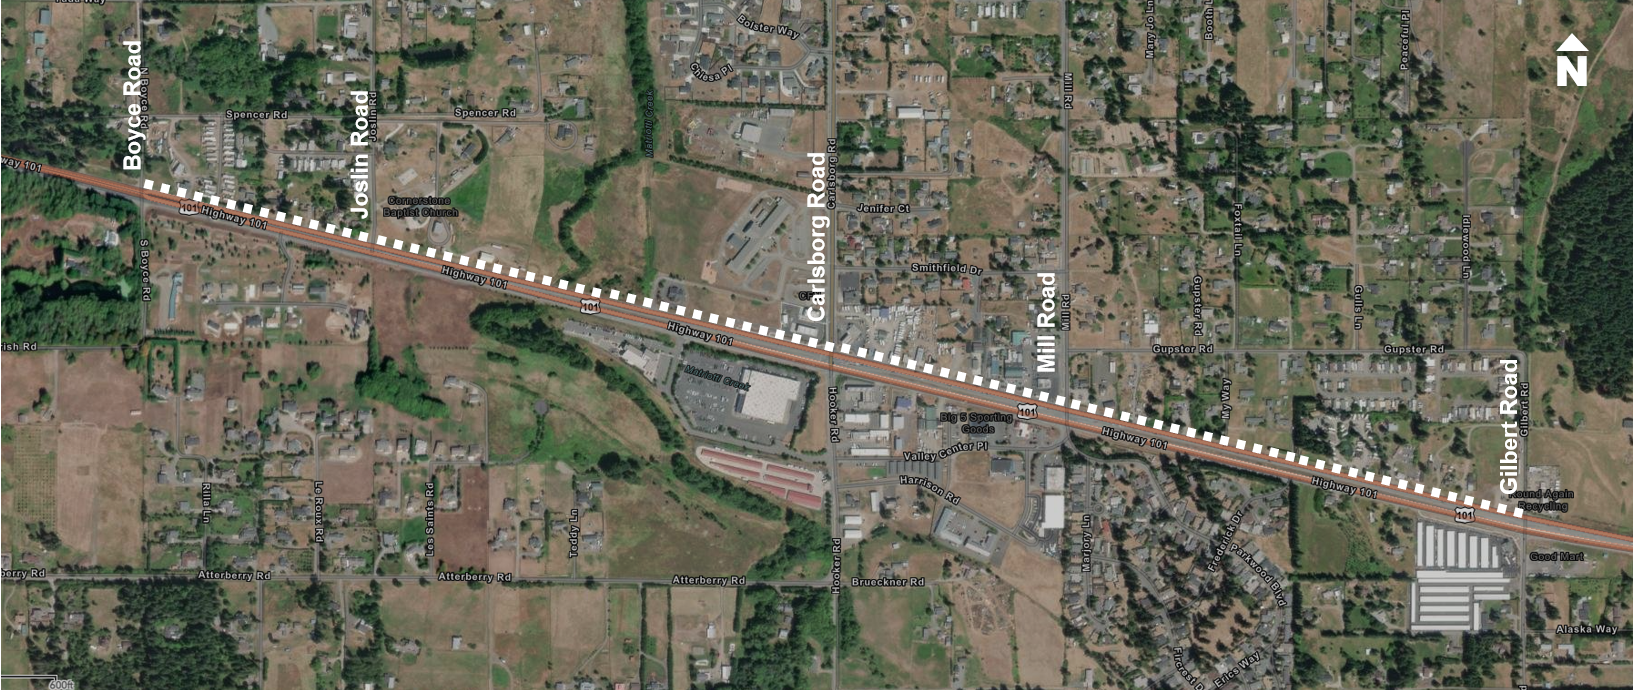 Aerial map of US 101 from Boyce Road to Gilbert Road showing a shared-up path along the highway.